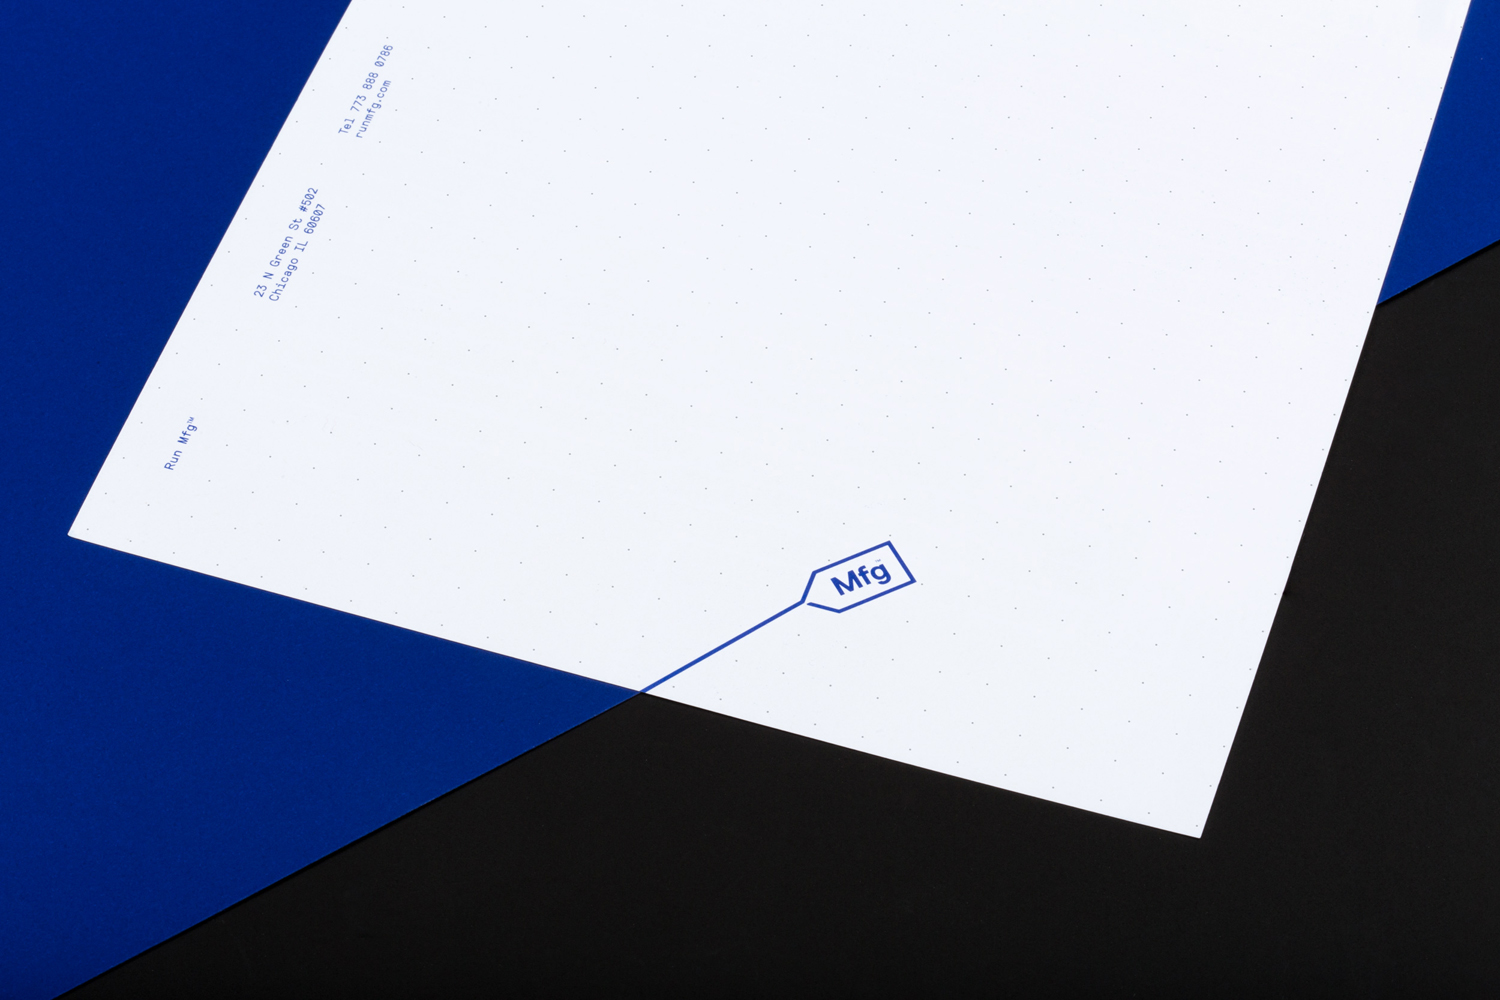 Brand identity and stationery by Perky Bros for Chicago-based independent race design and production company Run Mfg